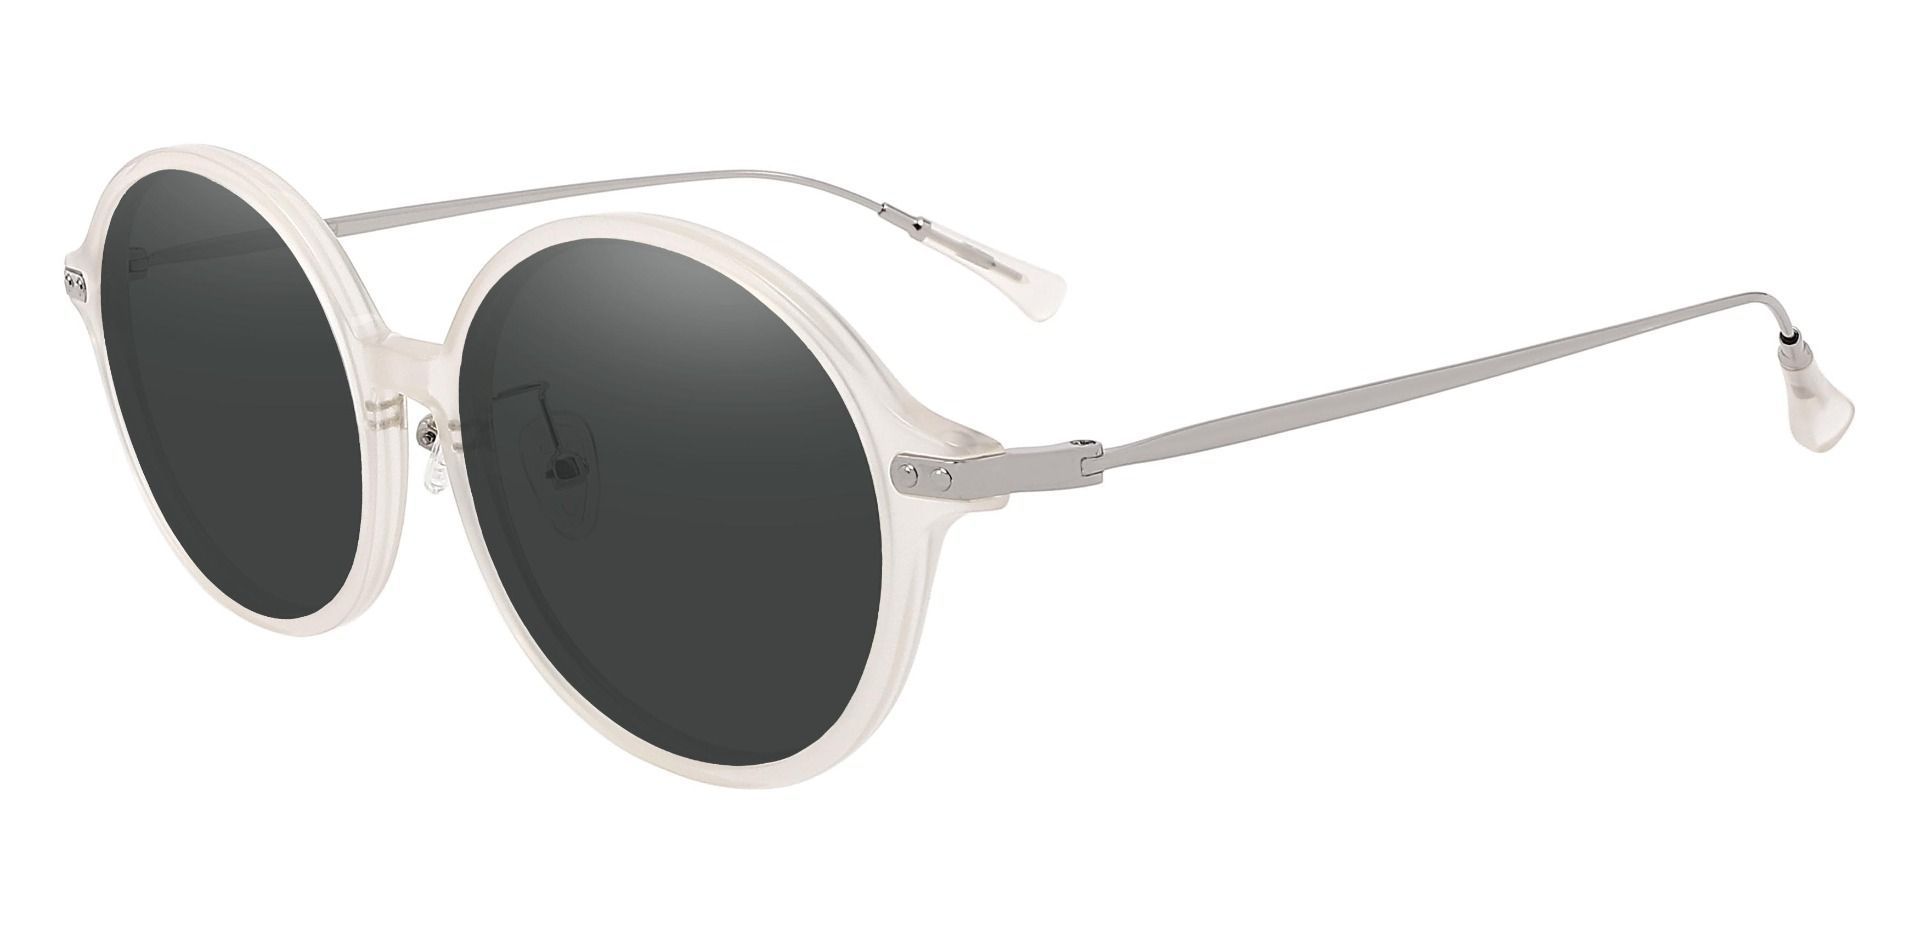 Princeton Round Non-Rx Sunglasses - Clear Frame With Gray Lenses